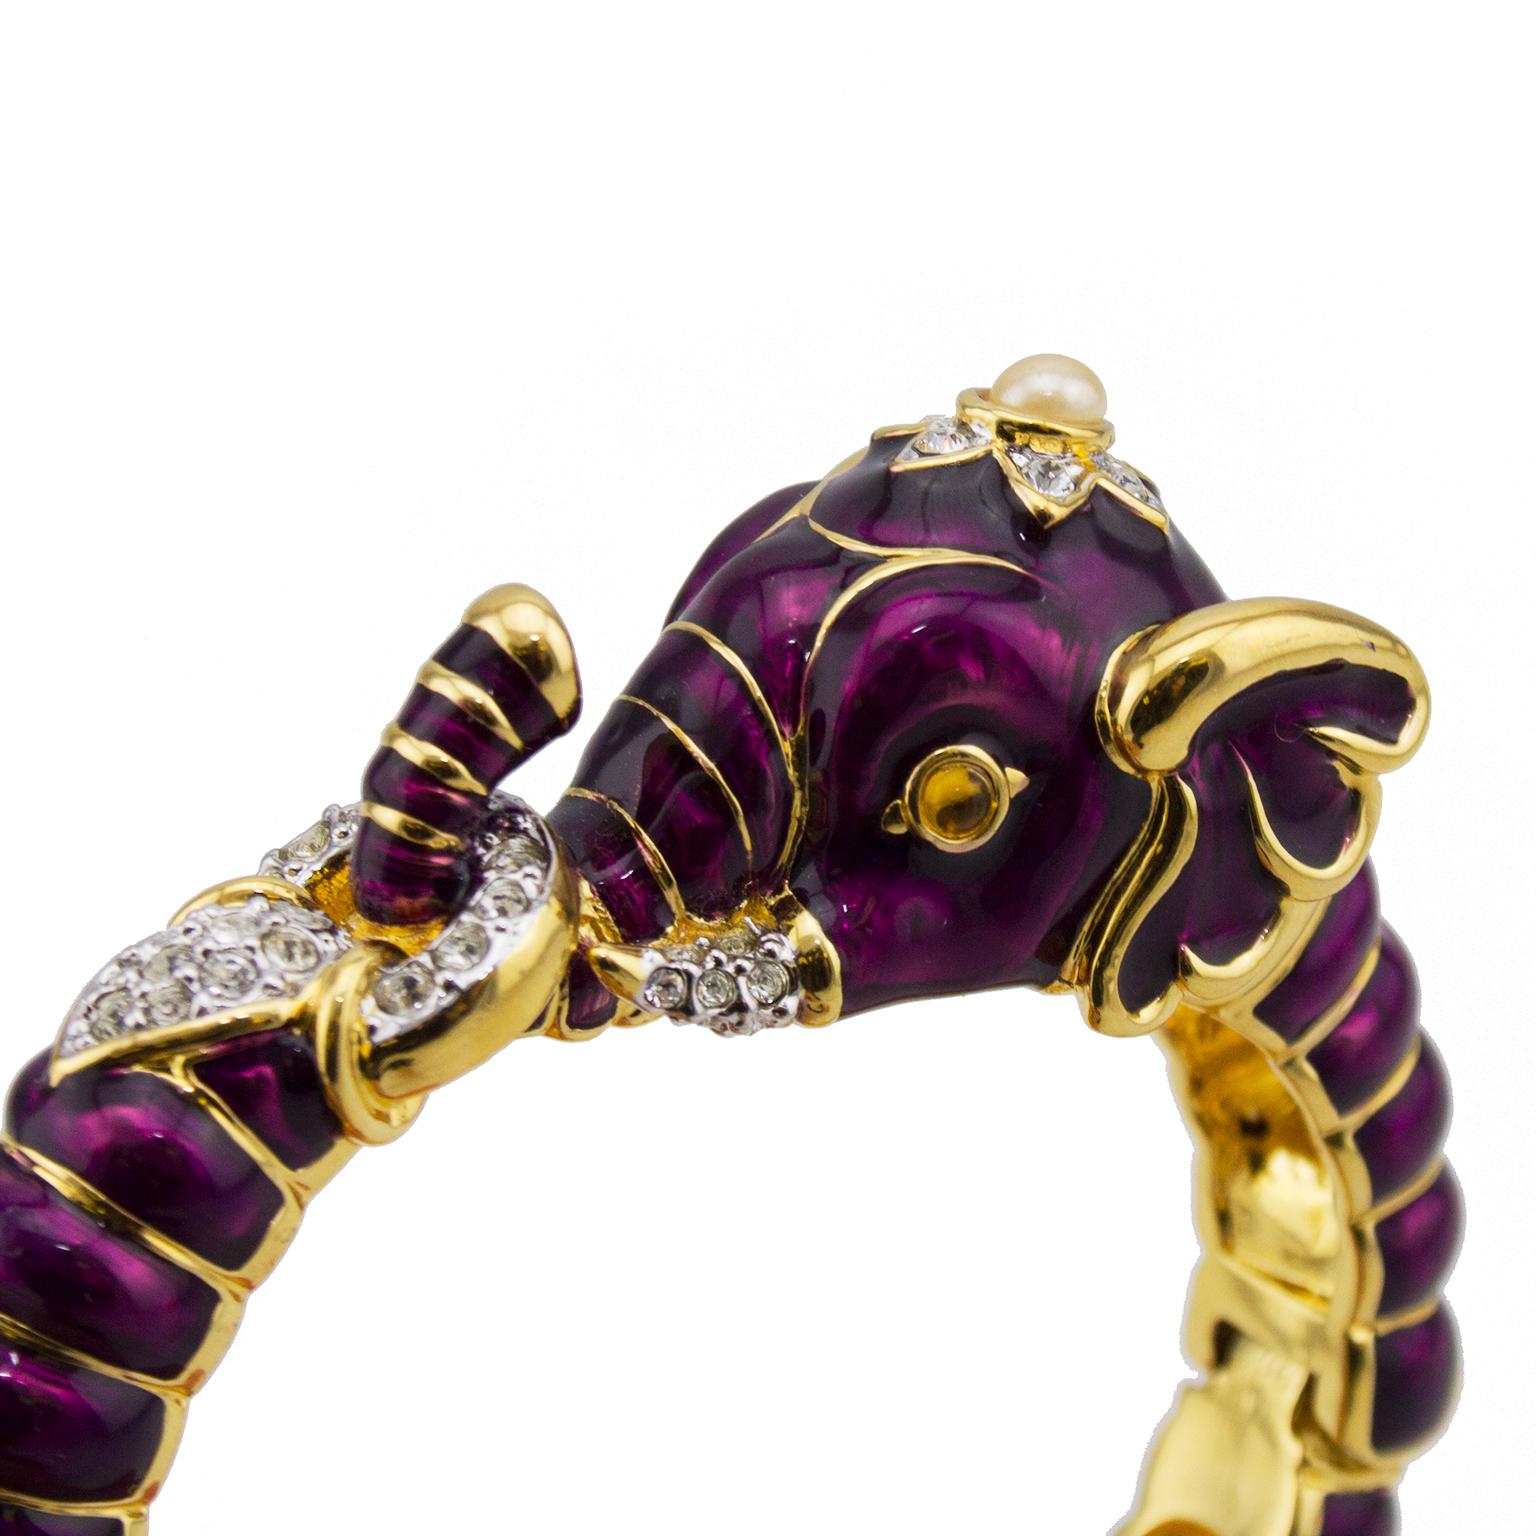 Gorgeous KJL purple enamel and gold elephant shaped clamper bracelet with rhinestone and pearl accent. This bracelet was produced in at least 6 different colors between the 1980s and the 1990s. The elephant features it's trunk hooked upwards through